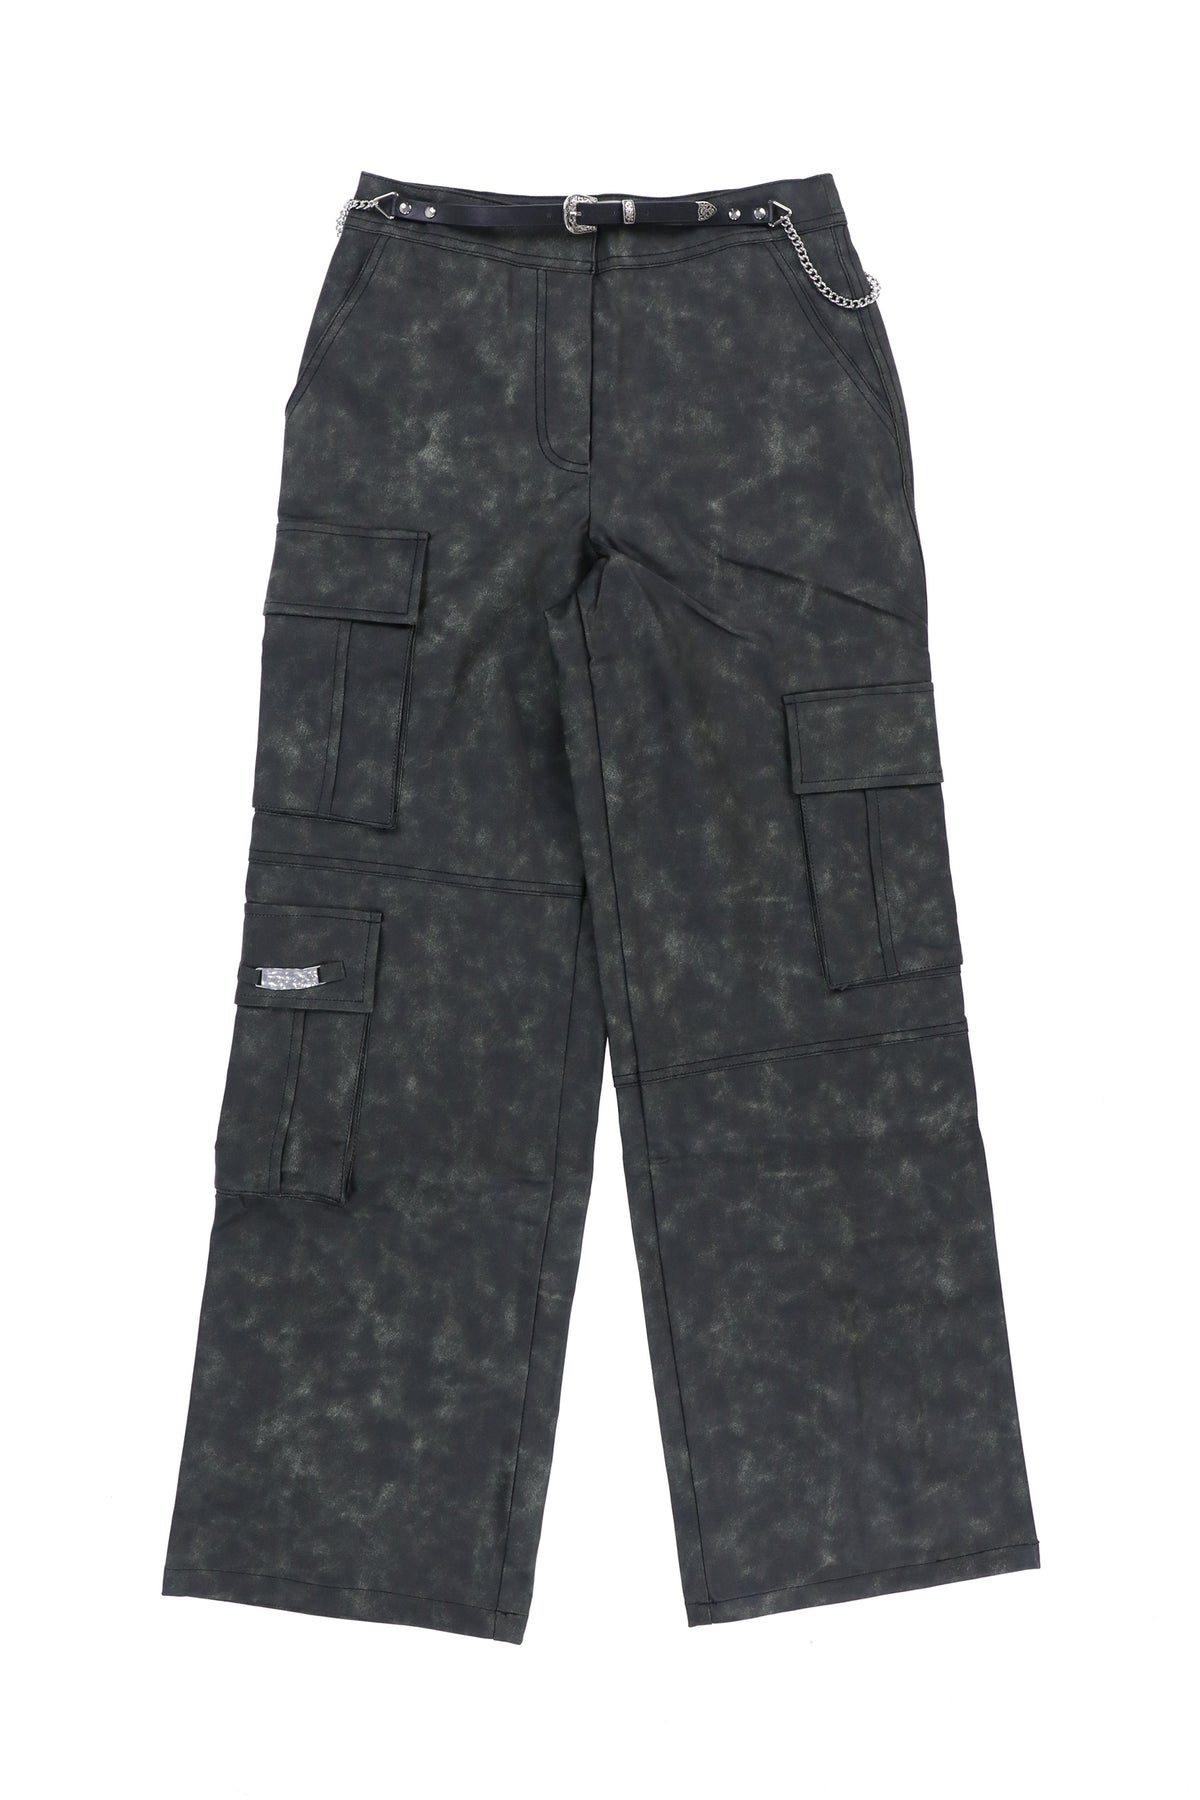 Andersson Bell BELTED CARGO PANTS (L) / KHA